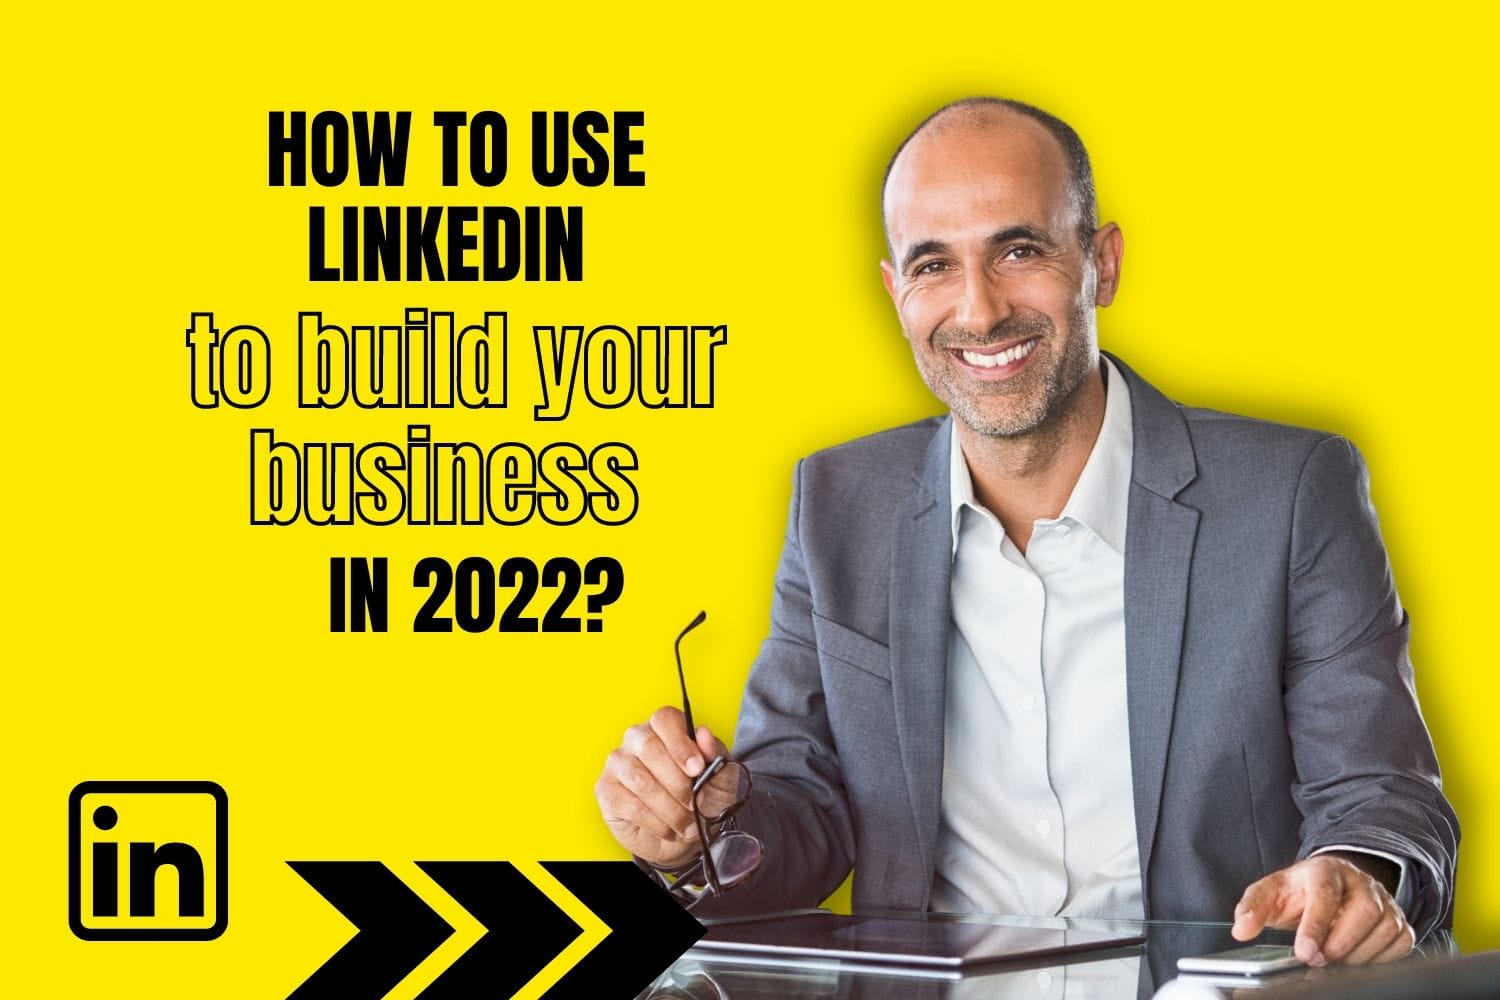 How to use LinkedIn to build your business in 2022?